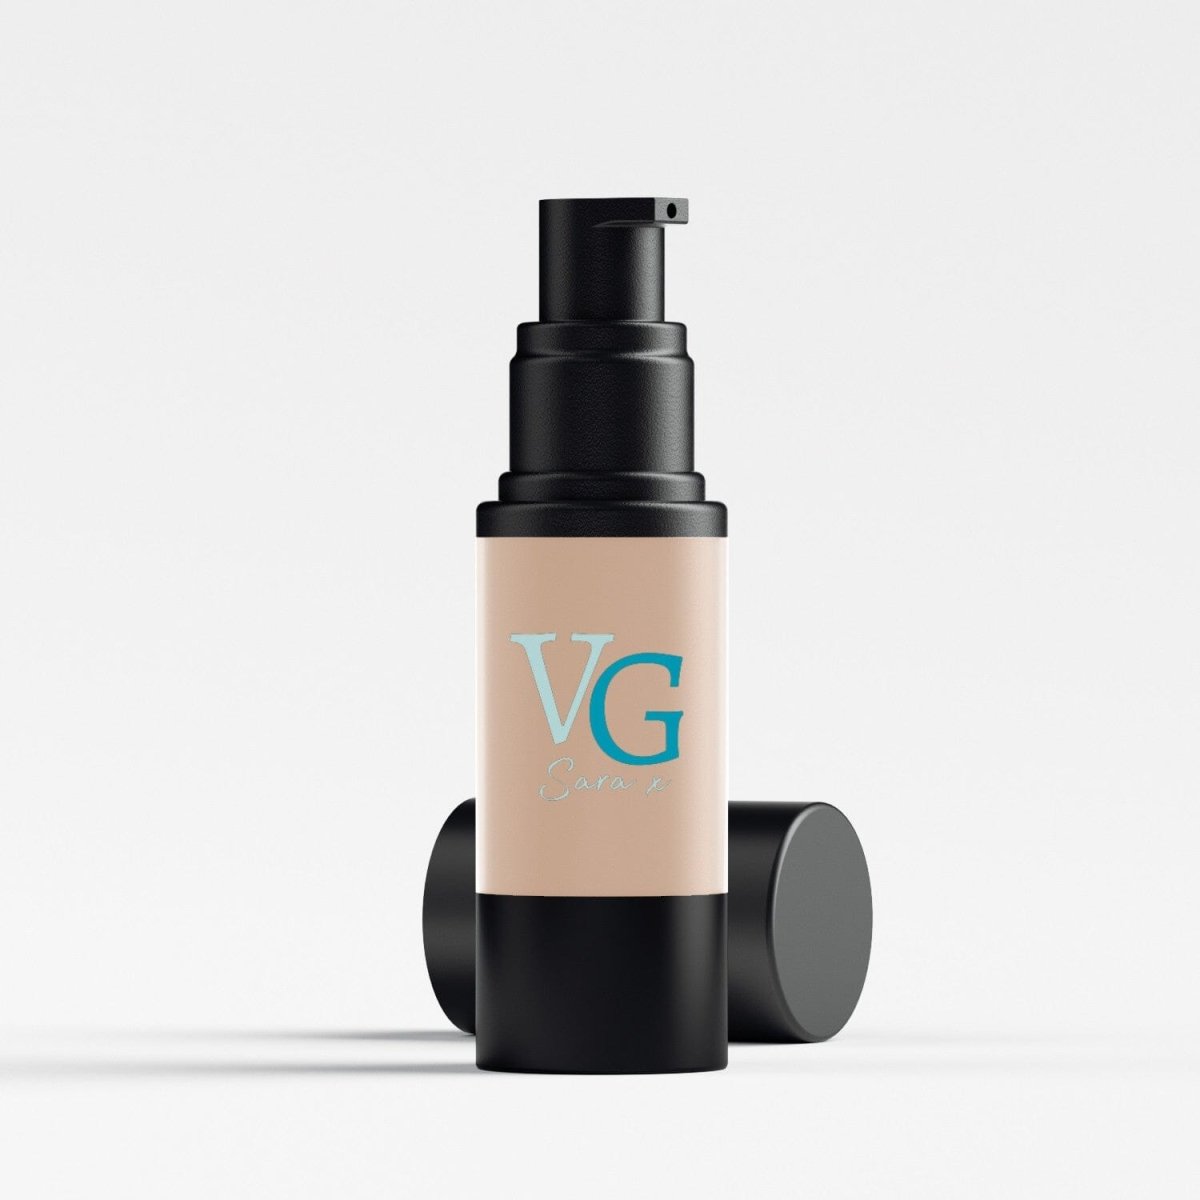 VG Cosmetics Blemish Balm product with cruelty-free label